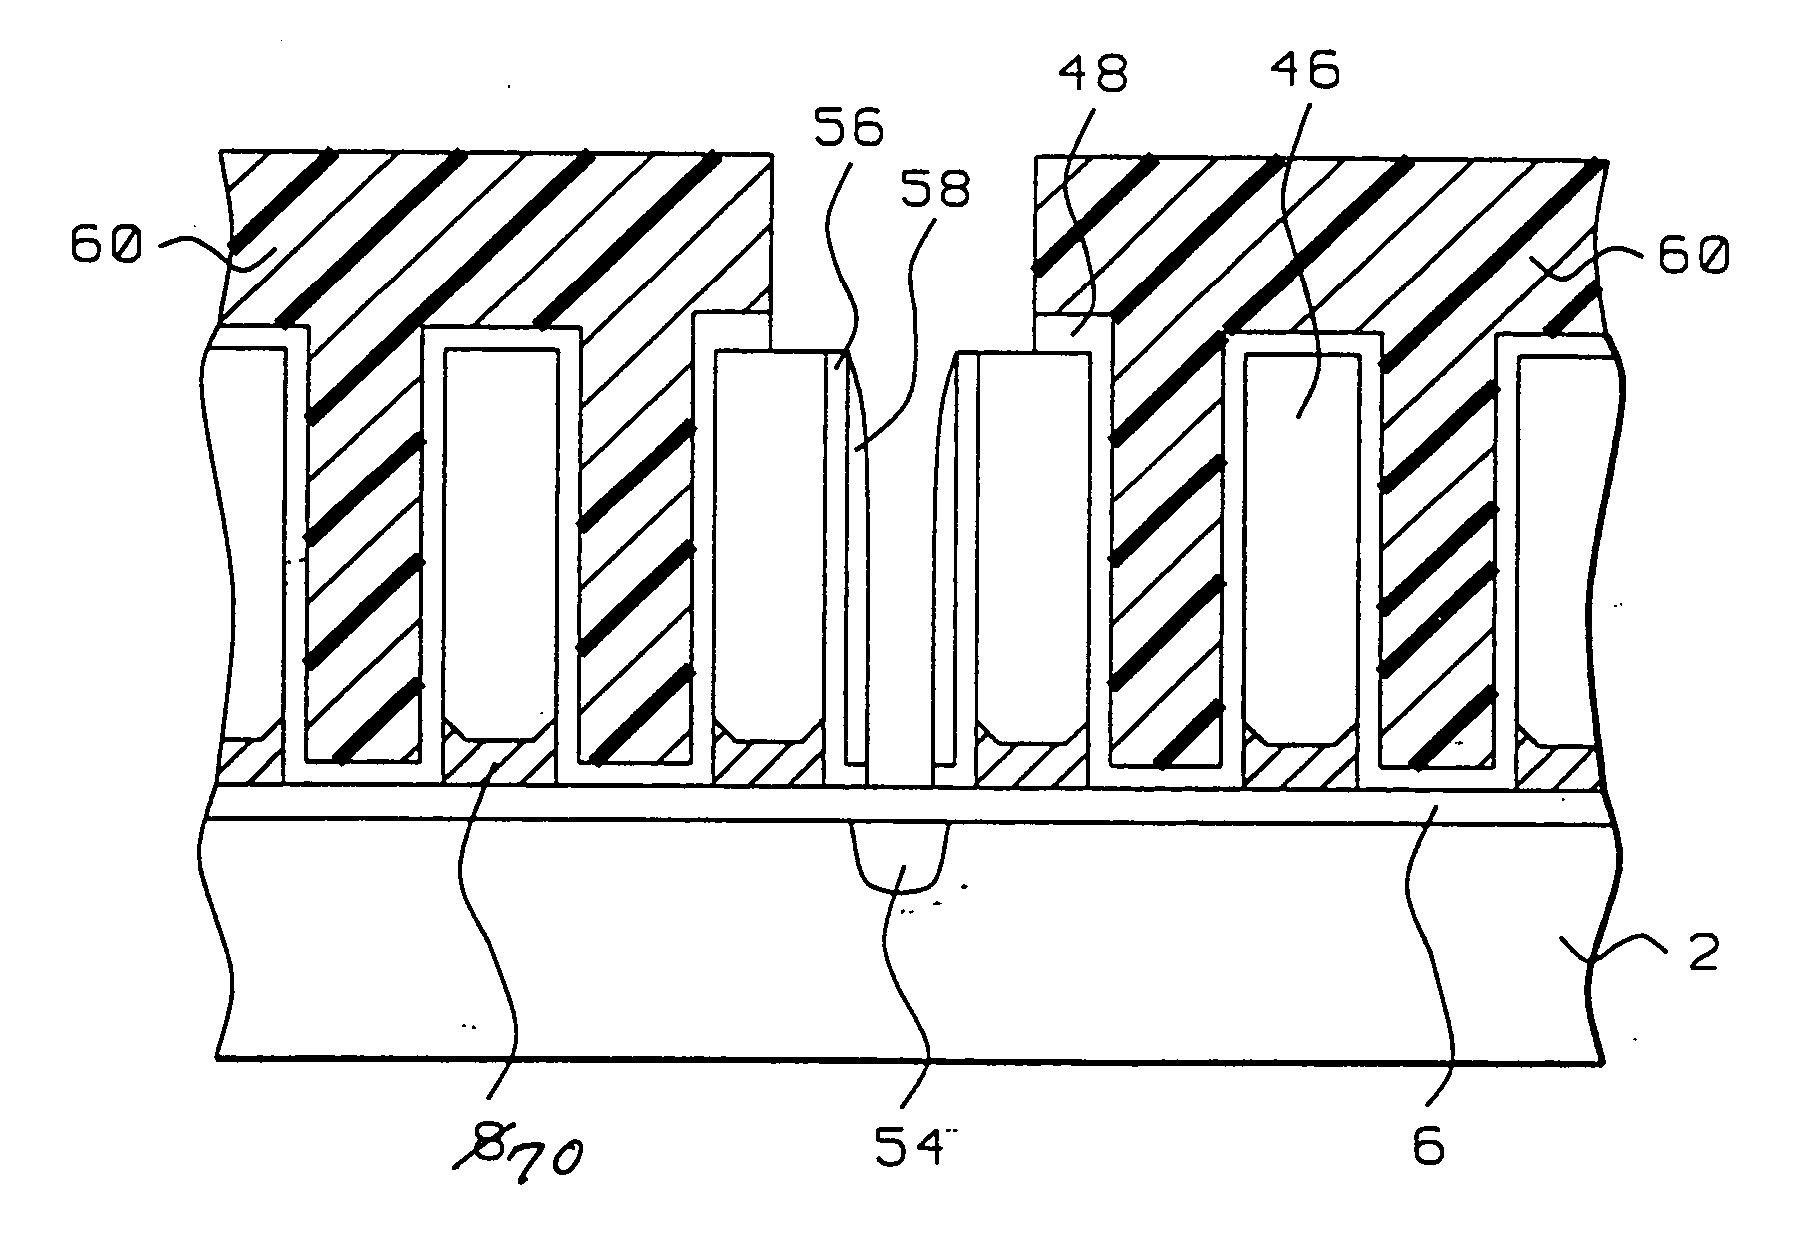 Structure and fabricating method to make a cell with multi-self-alignment in split gate flash